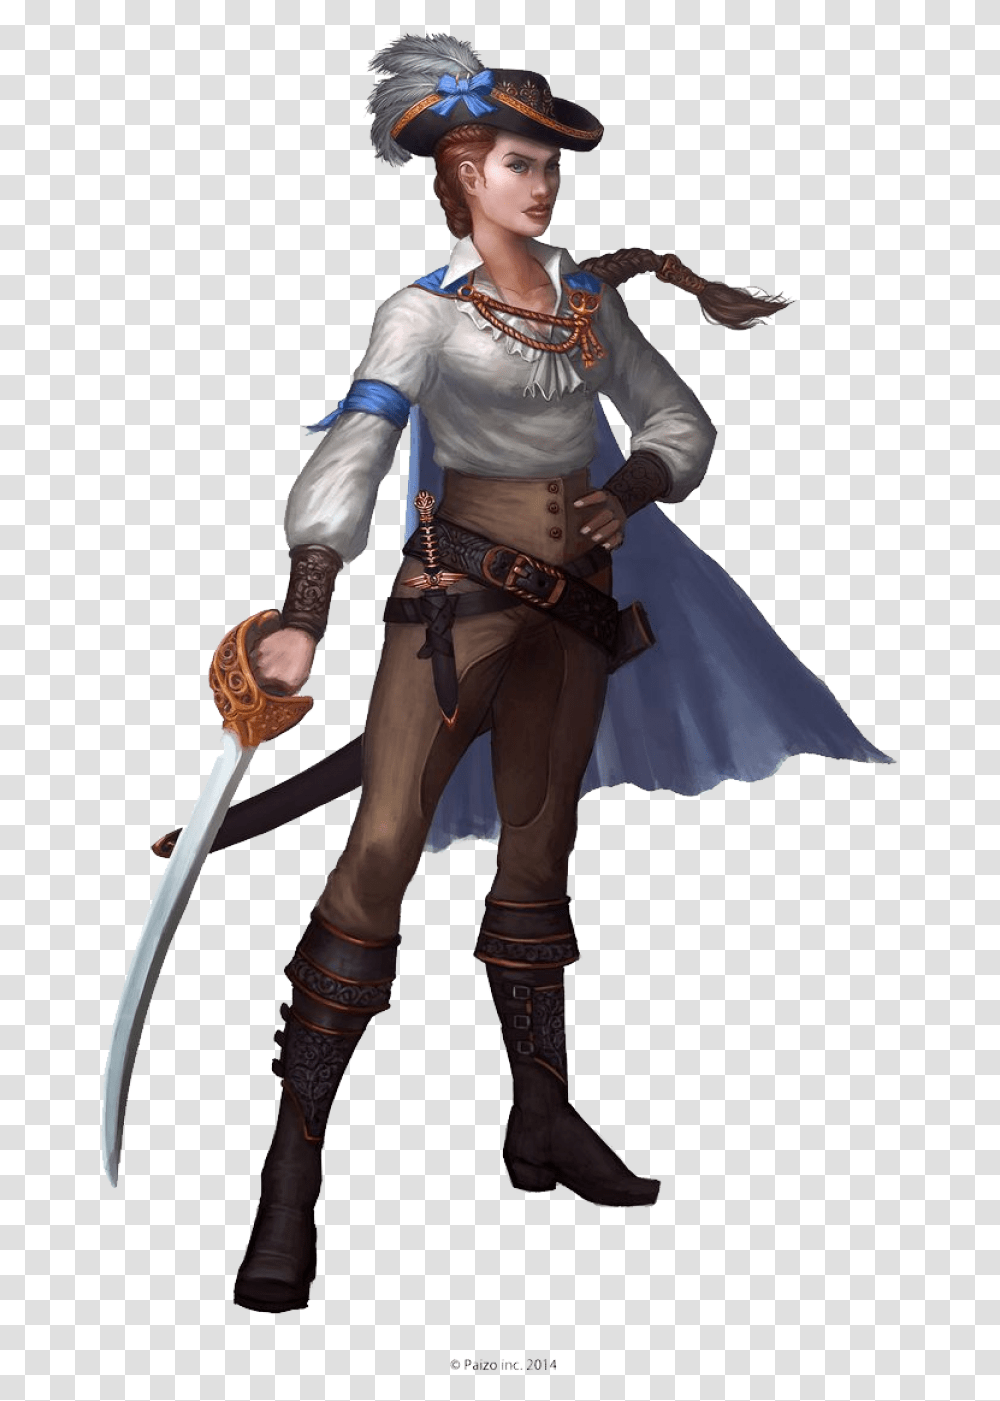 Download Pirate Image For Free Pirate Dungeons And Dragons, Person, Human, Costume, Clothing Transparent Png